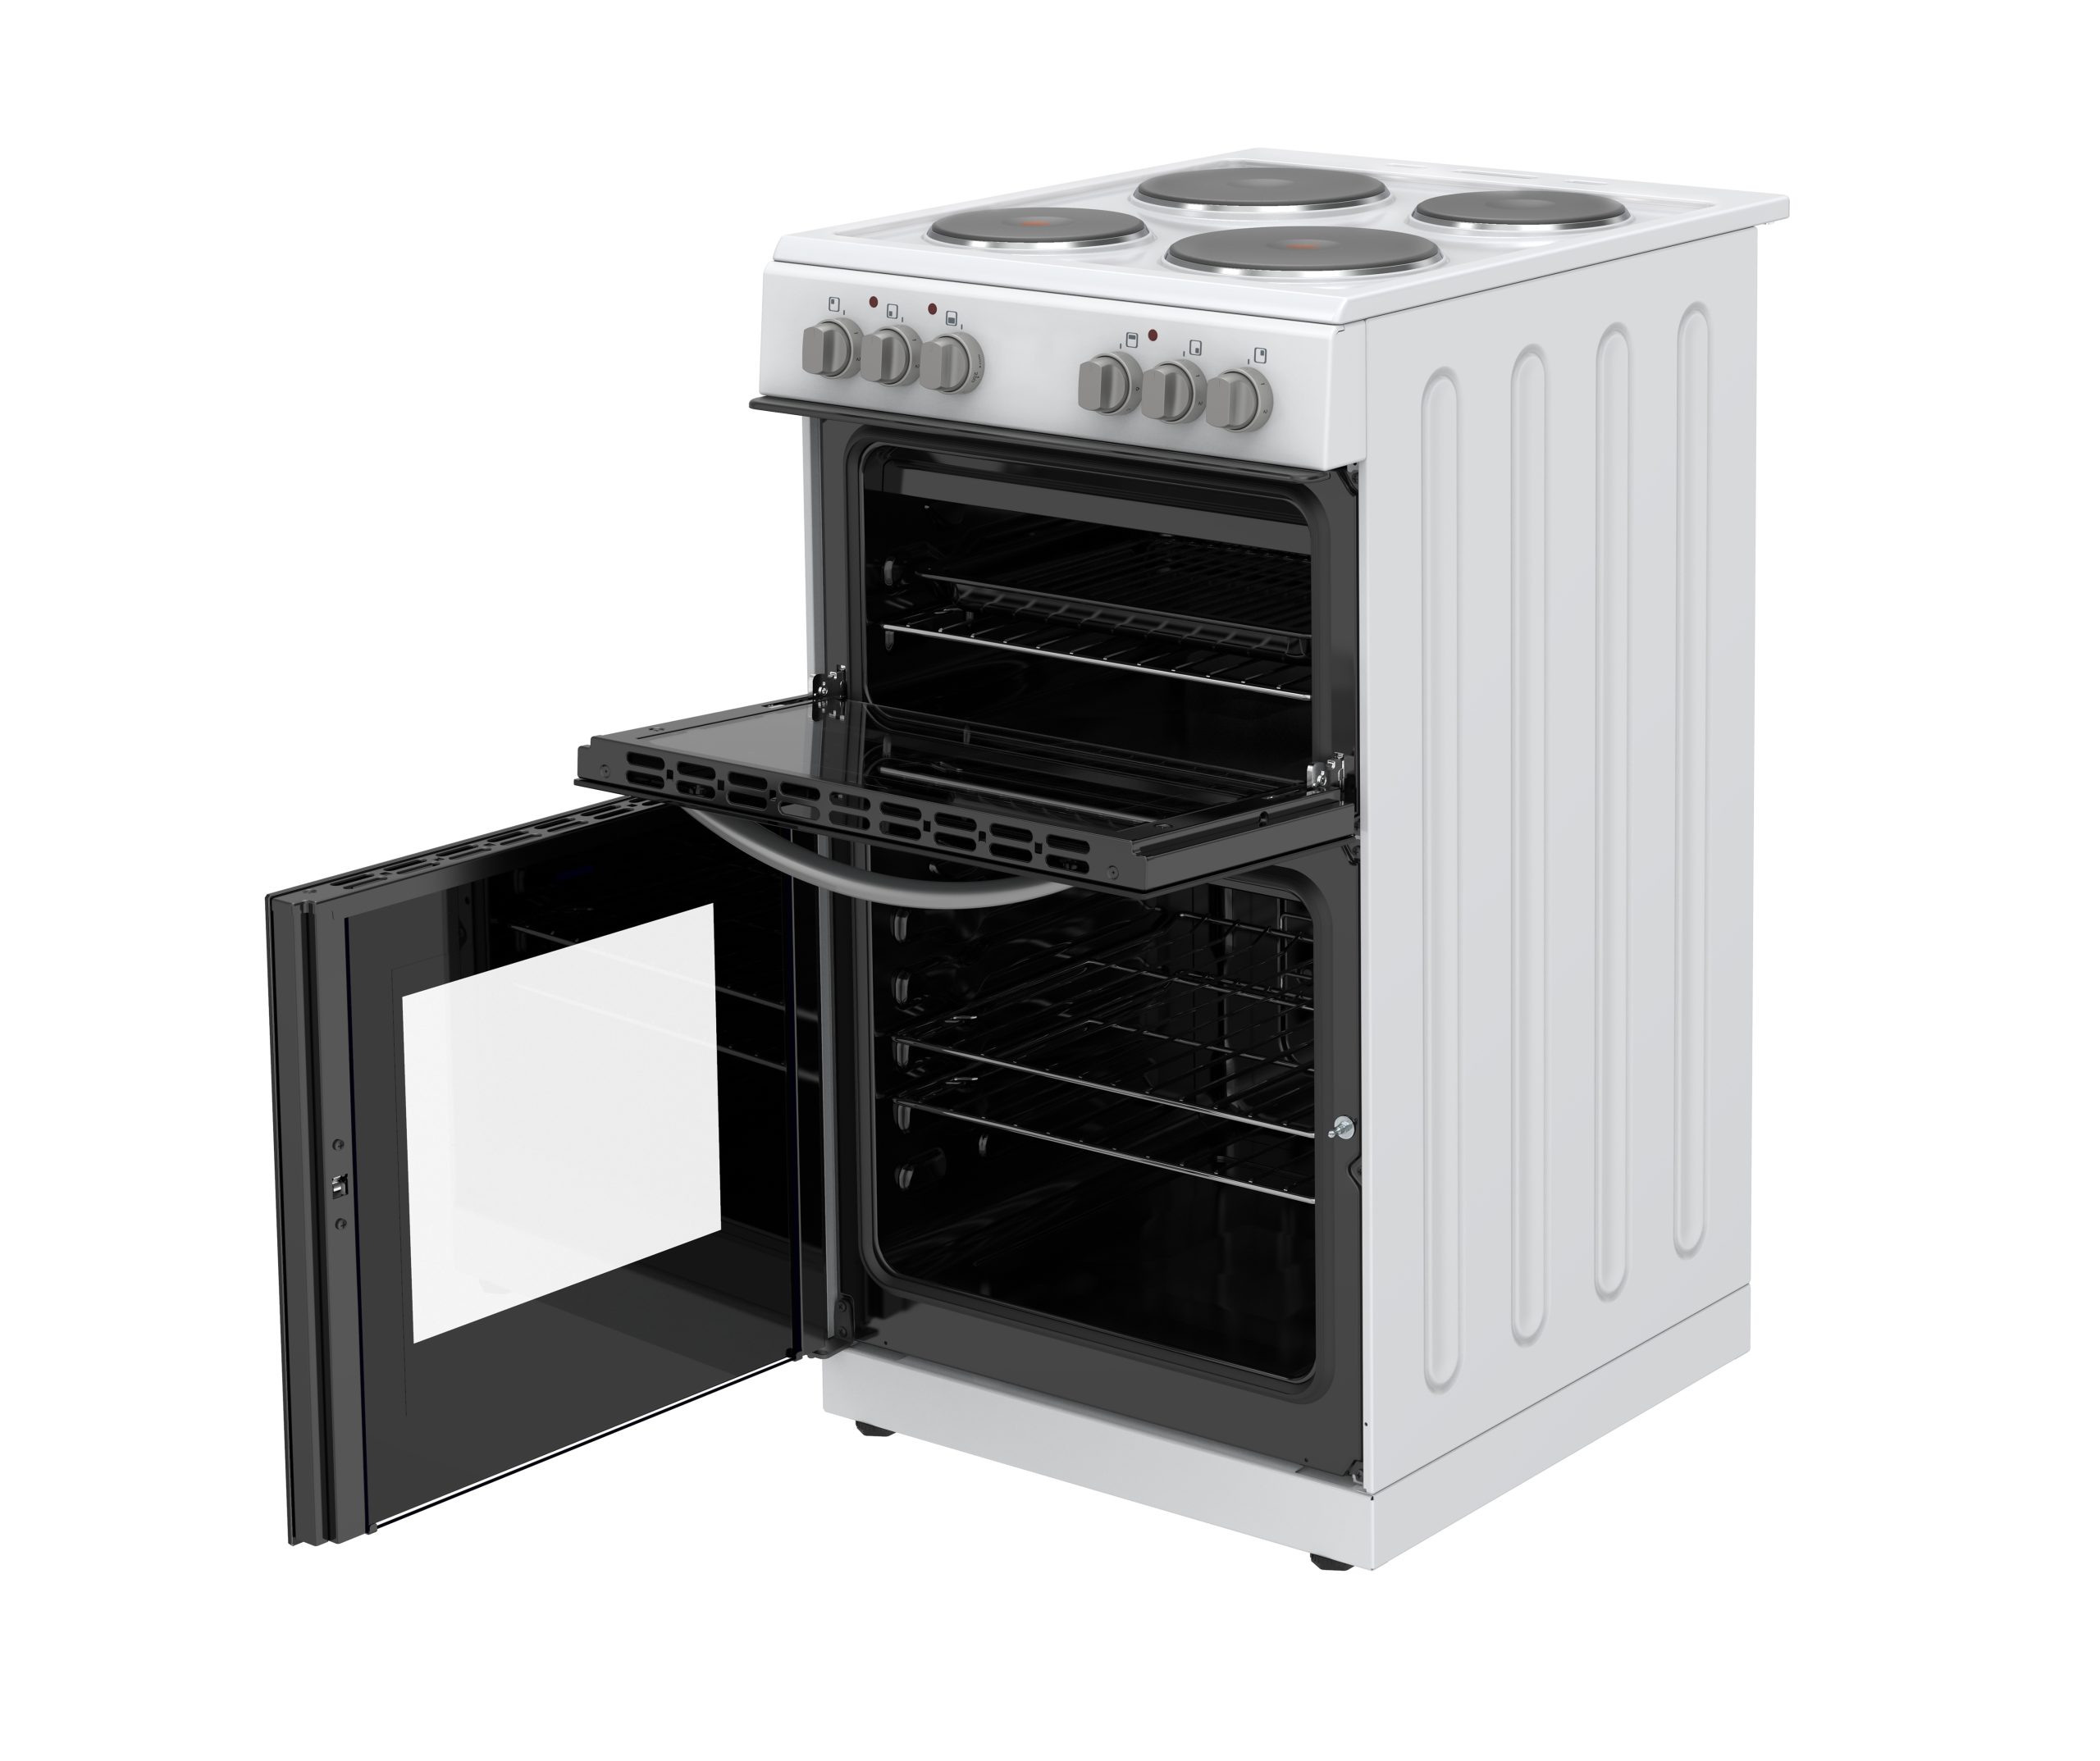 Montpellier MTCE50W 50cm Twin Cavity Electric Cooker in White